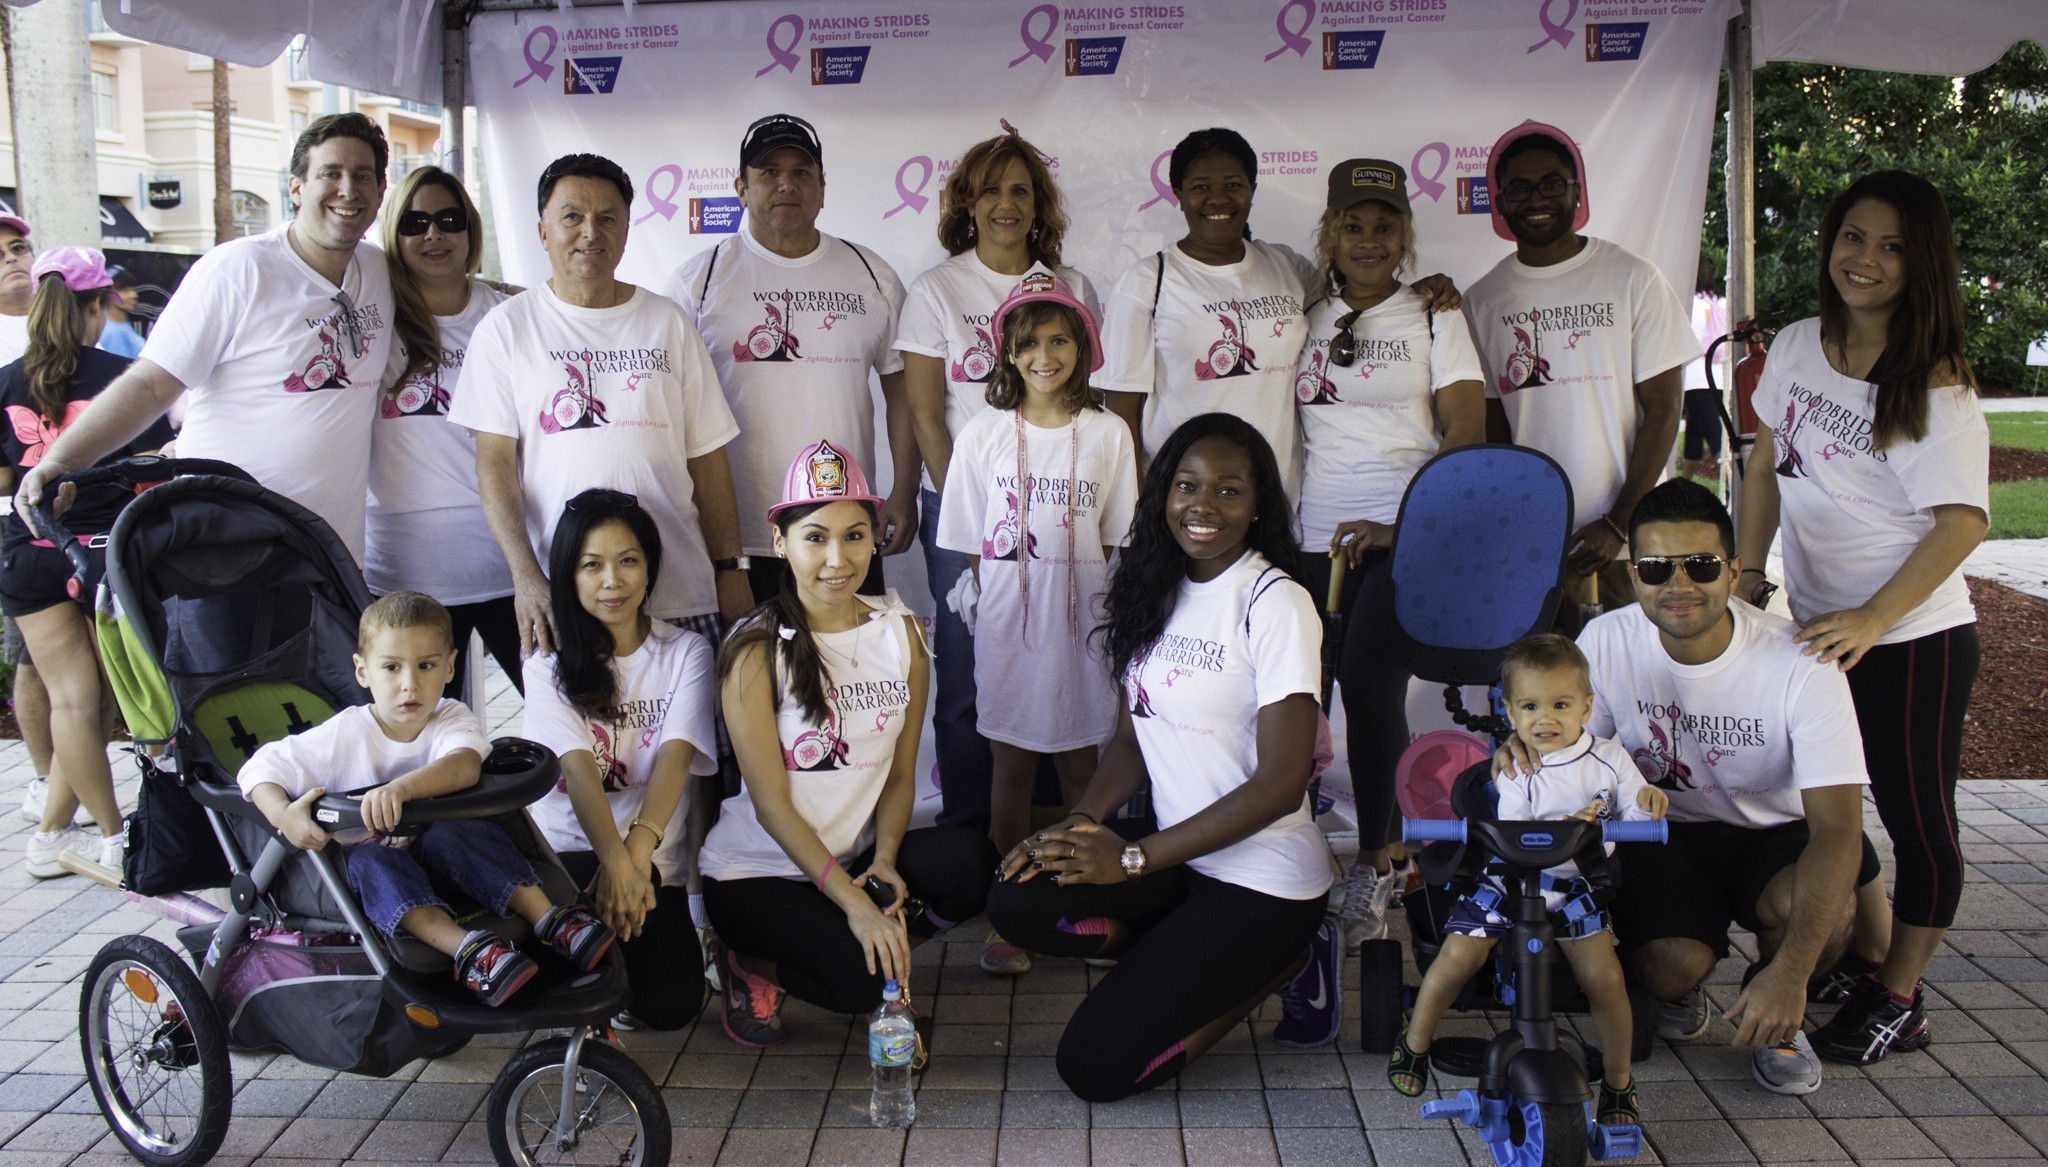 Woodbridge Warriors during the Making Strides Against Breast Cancer walk in South Palm Beach, FL, October 25, 2014